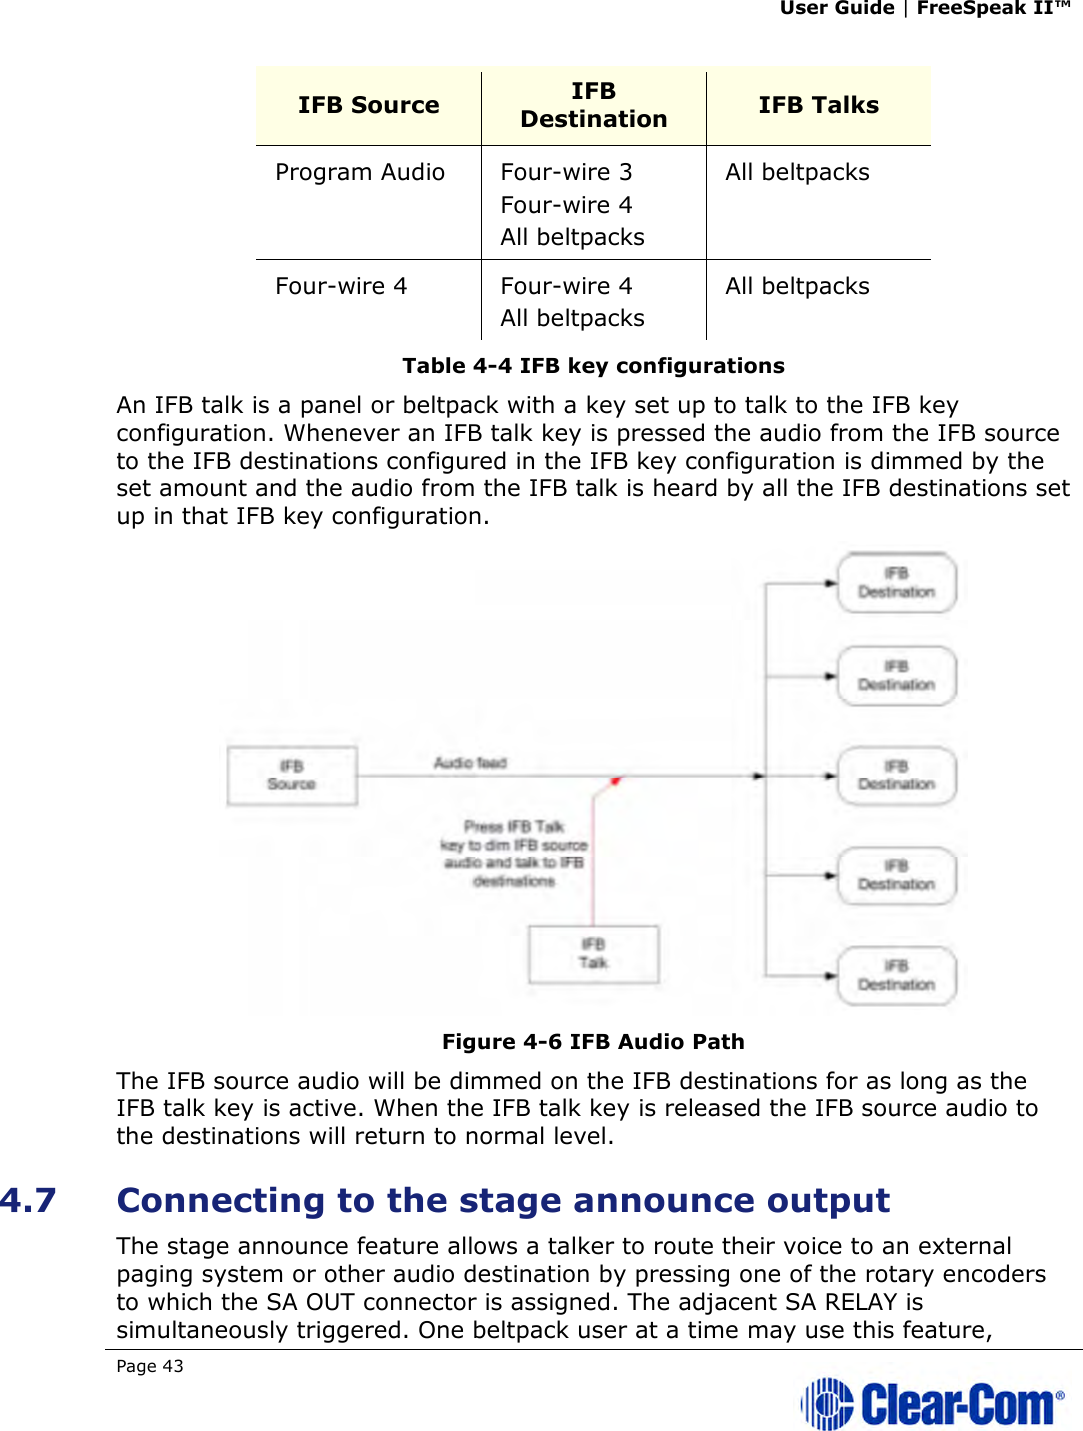 User Guide | FreeSpeak II™  Page 43   IFB Source  IFB Destination  IFB Talks Program Audio  Four-wire 3 Four-wire 4 All beltpacks All beltpacks Four-wire 4  Four-wire 4 All beltpacks All beltpacks Table 4-4 IFB key configurations An IFB talk is a panel or beltpack with a key set up to talk to the IFB key configuration. Whenever an IFB talk key is pressed the audio from the IFB source to the IFB destinations configured in the IFB key configuration is dimmed by the set amount and the audio from the IFB talk is heard by all the IFB destinations set up in that IFB key configuration.  Figure 4-6 IFB Audio Path The IFB source audio will be dimmed on the IFB destinations for as long as the IFB talk key is active. When the IFB talk key is released the IFB source audio to the destinations will return to normal level. 4.7 Connecting to the stage announce output The stage announce feature allows a talker to route their voice to an external paging system or other audio destination by pressing one of the rotary encoders to which the SA OUT connector is assigned. The adjacent SA RELAY is simultaneously triggered. One beltpack user at a time may use this feature, 